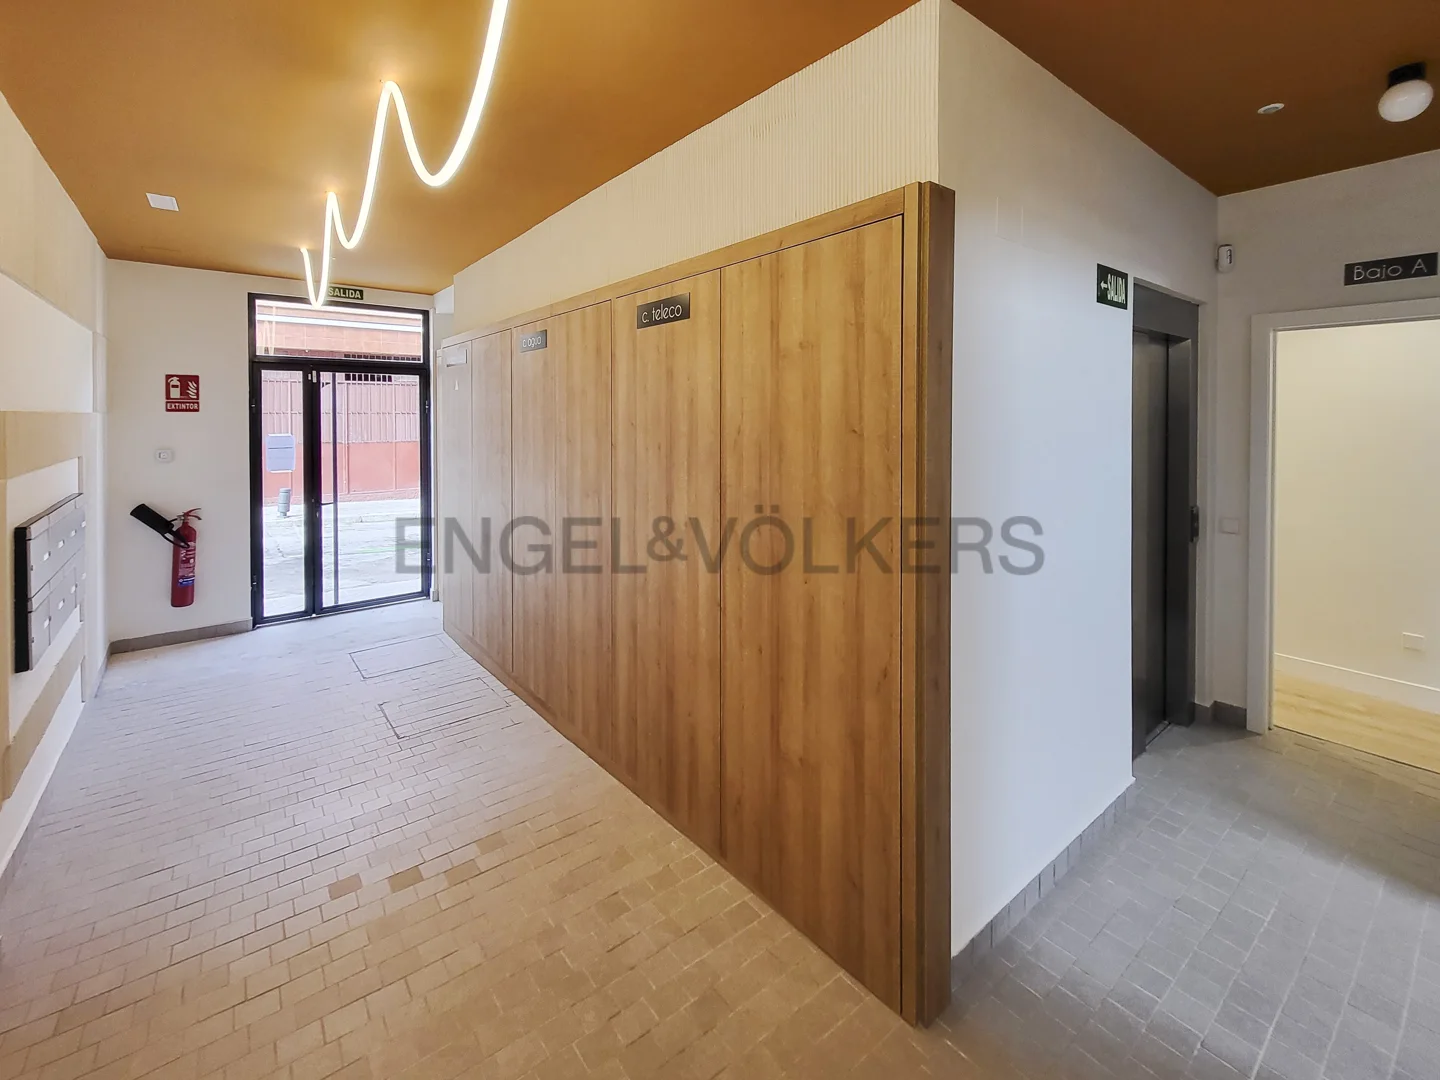 Furnished flat with 1 bedroom and patio near Madrid Centro